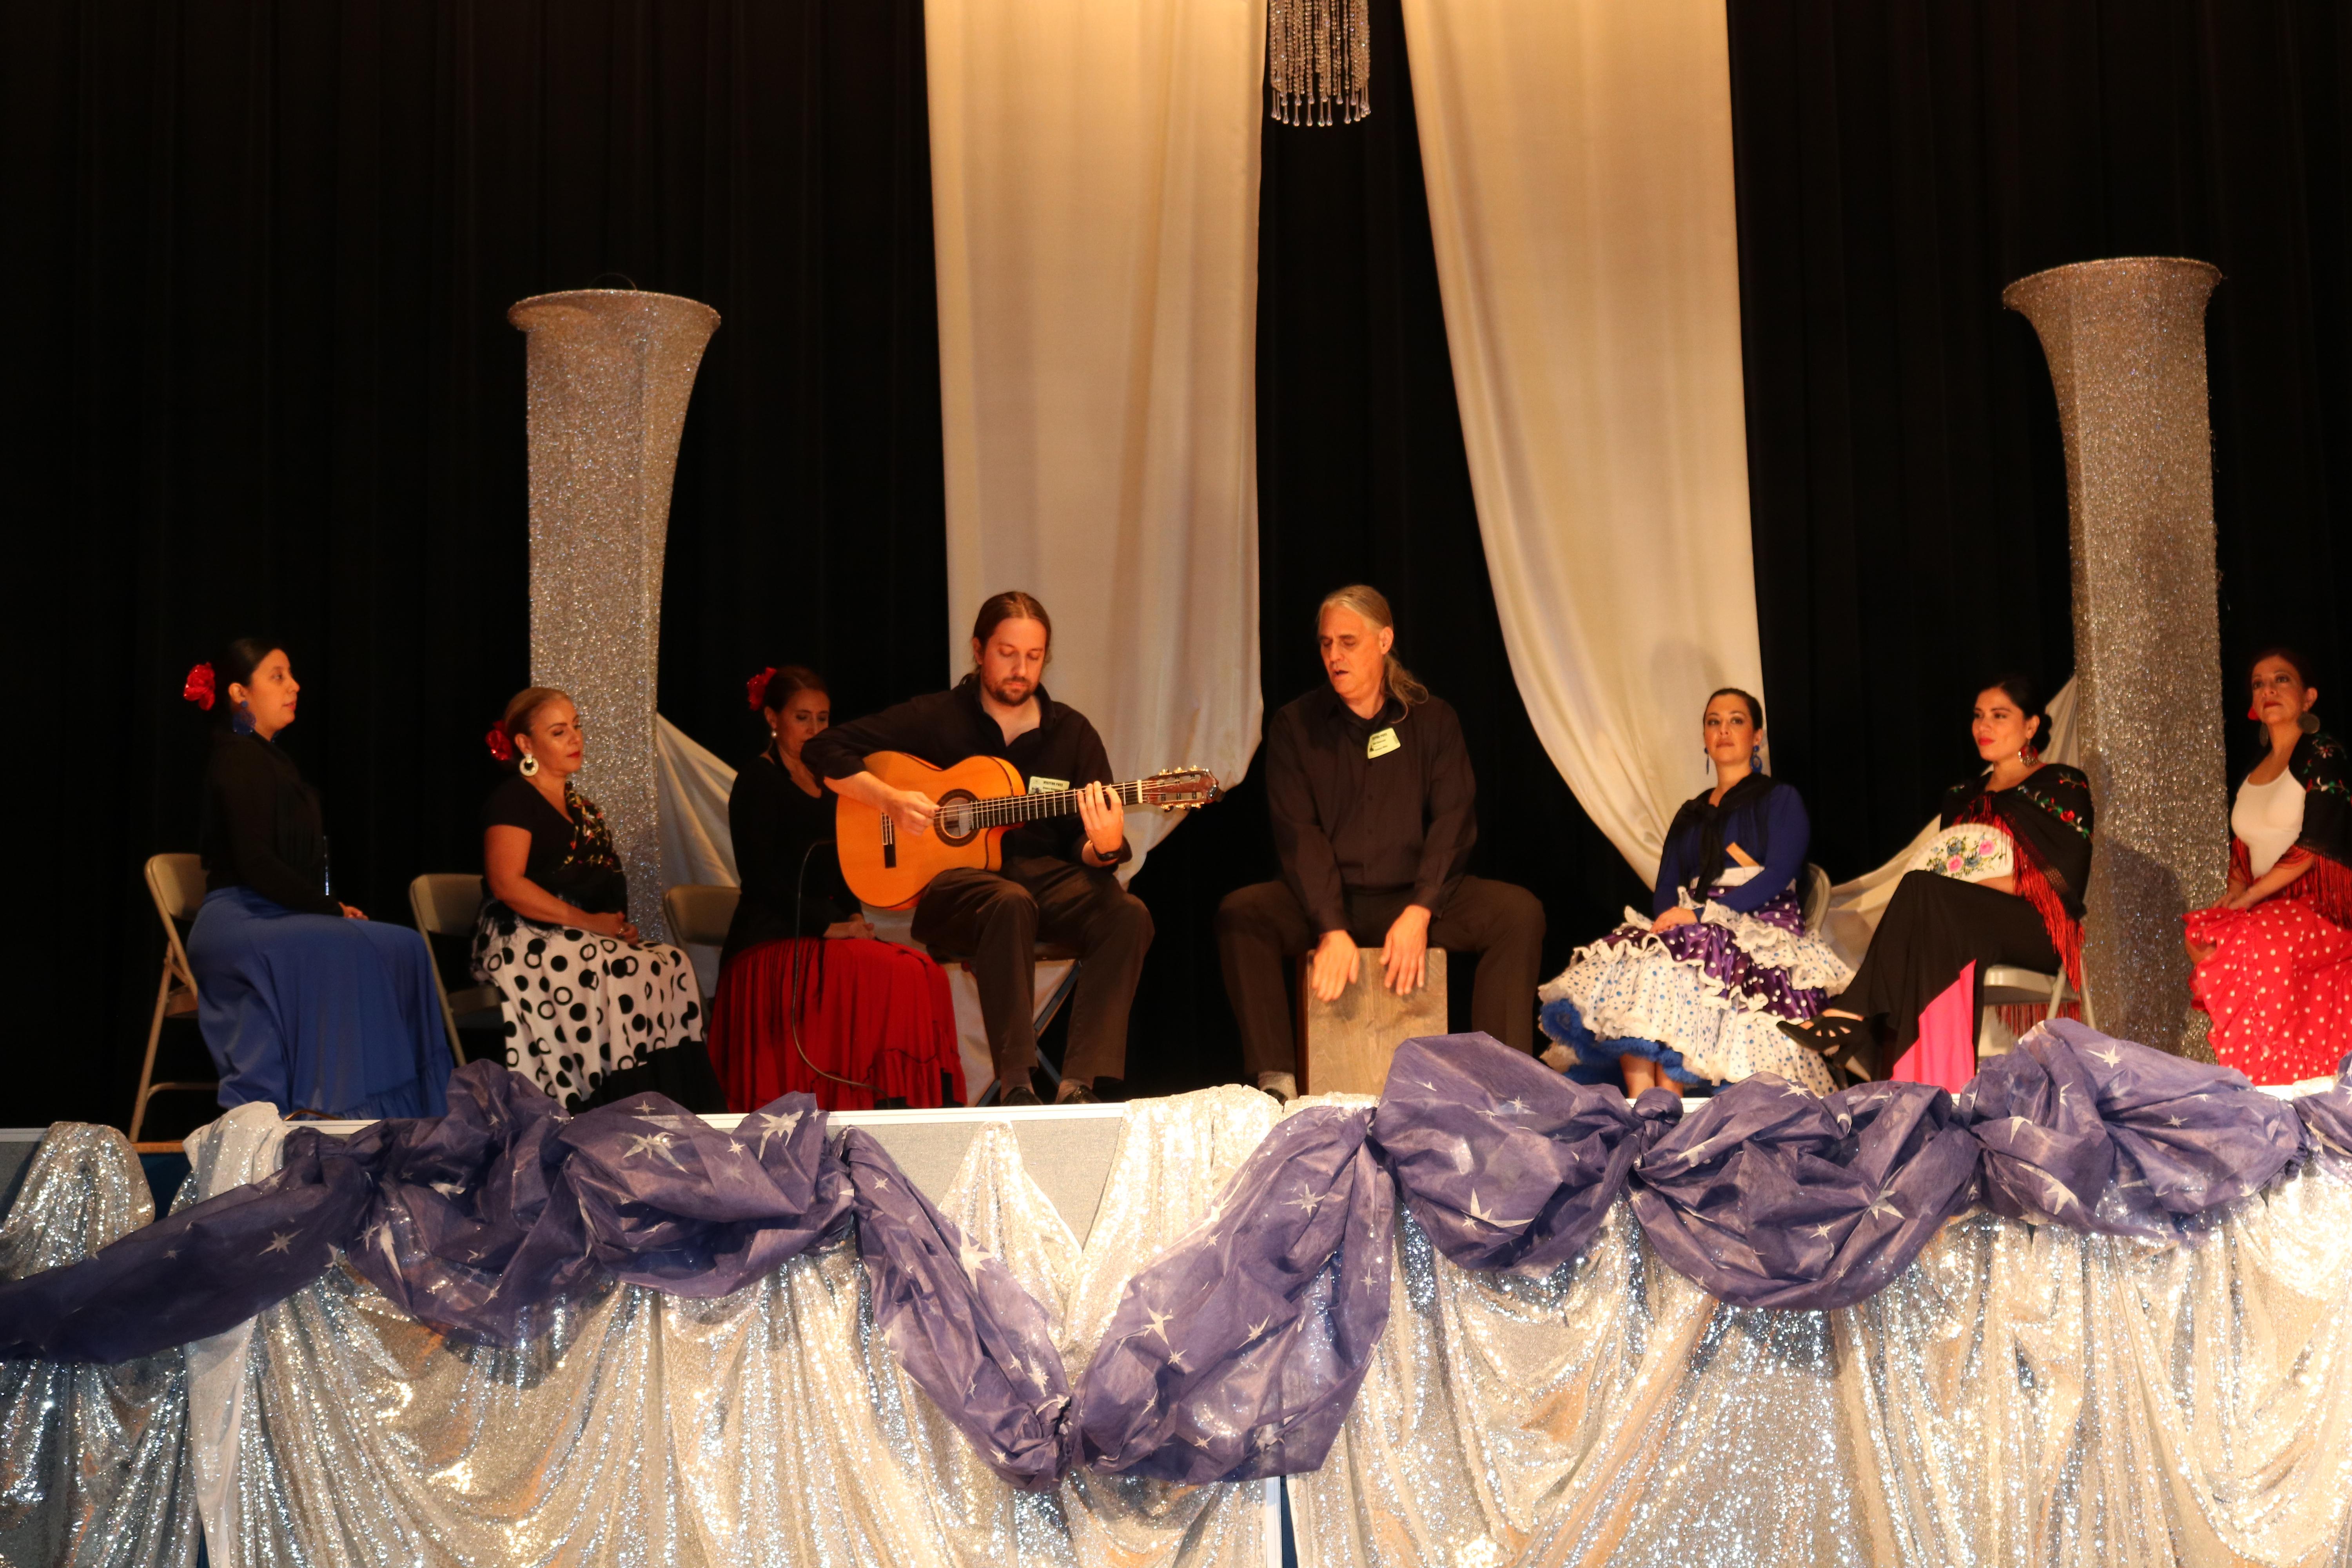 CP teachers in flamenco costumes accompanying two musicians one with a guitar and the other the mambo drum